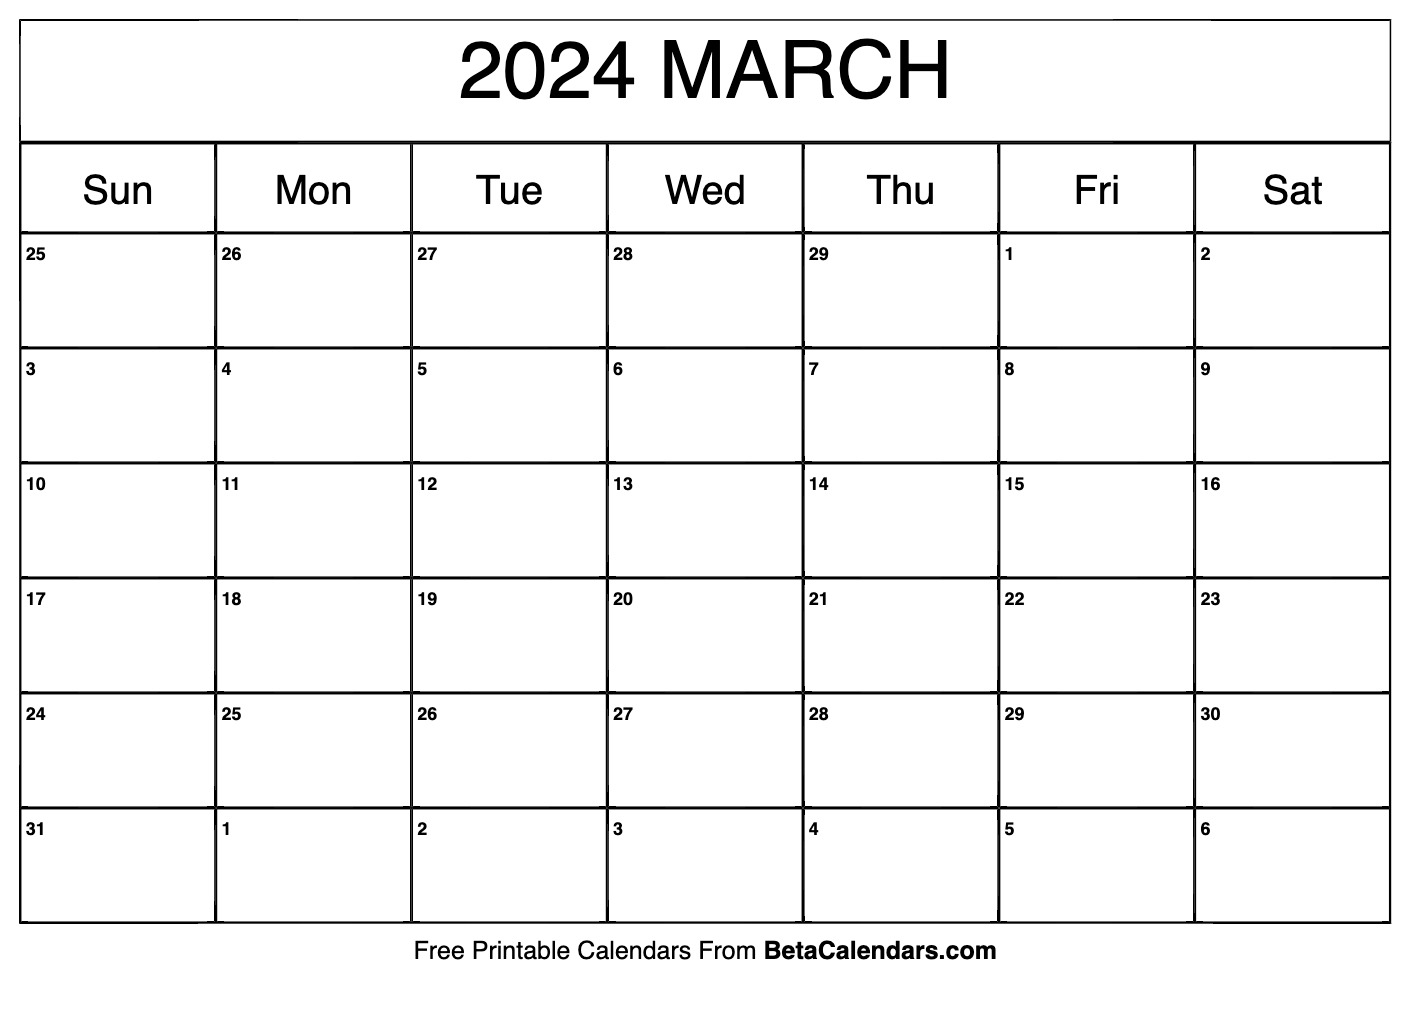 Free Printable March 2024 Calendar in Attendance Of March 2024